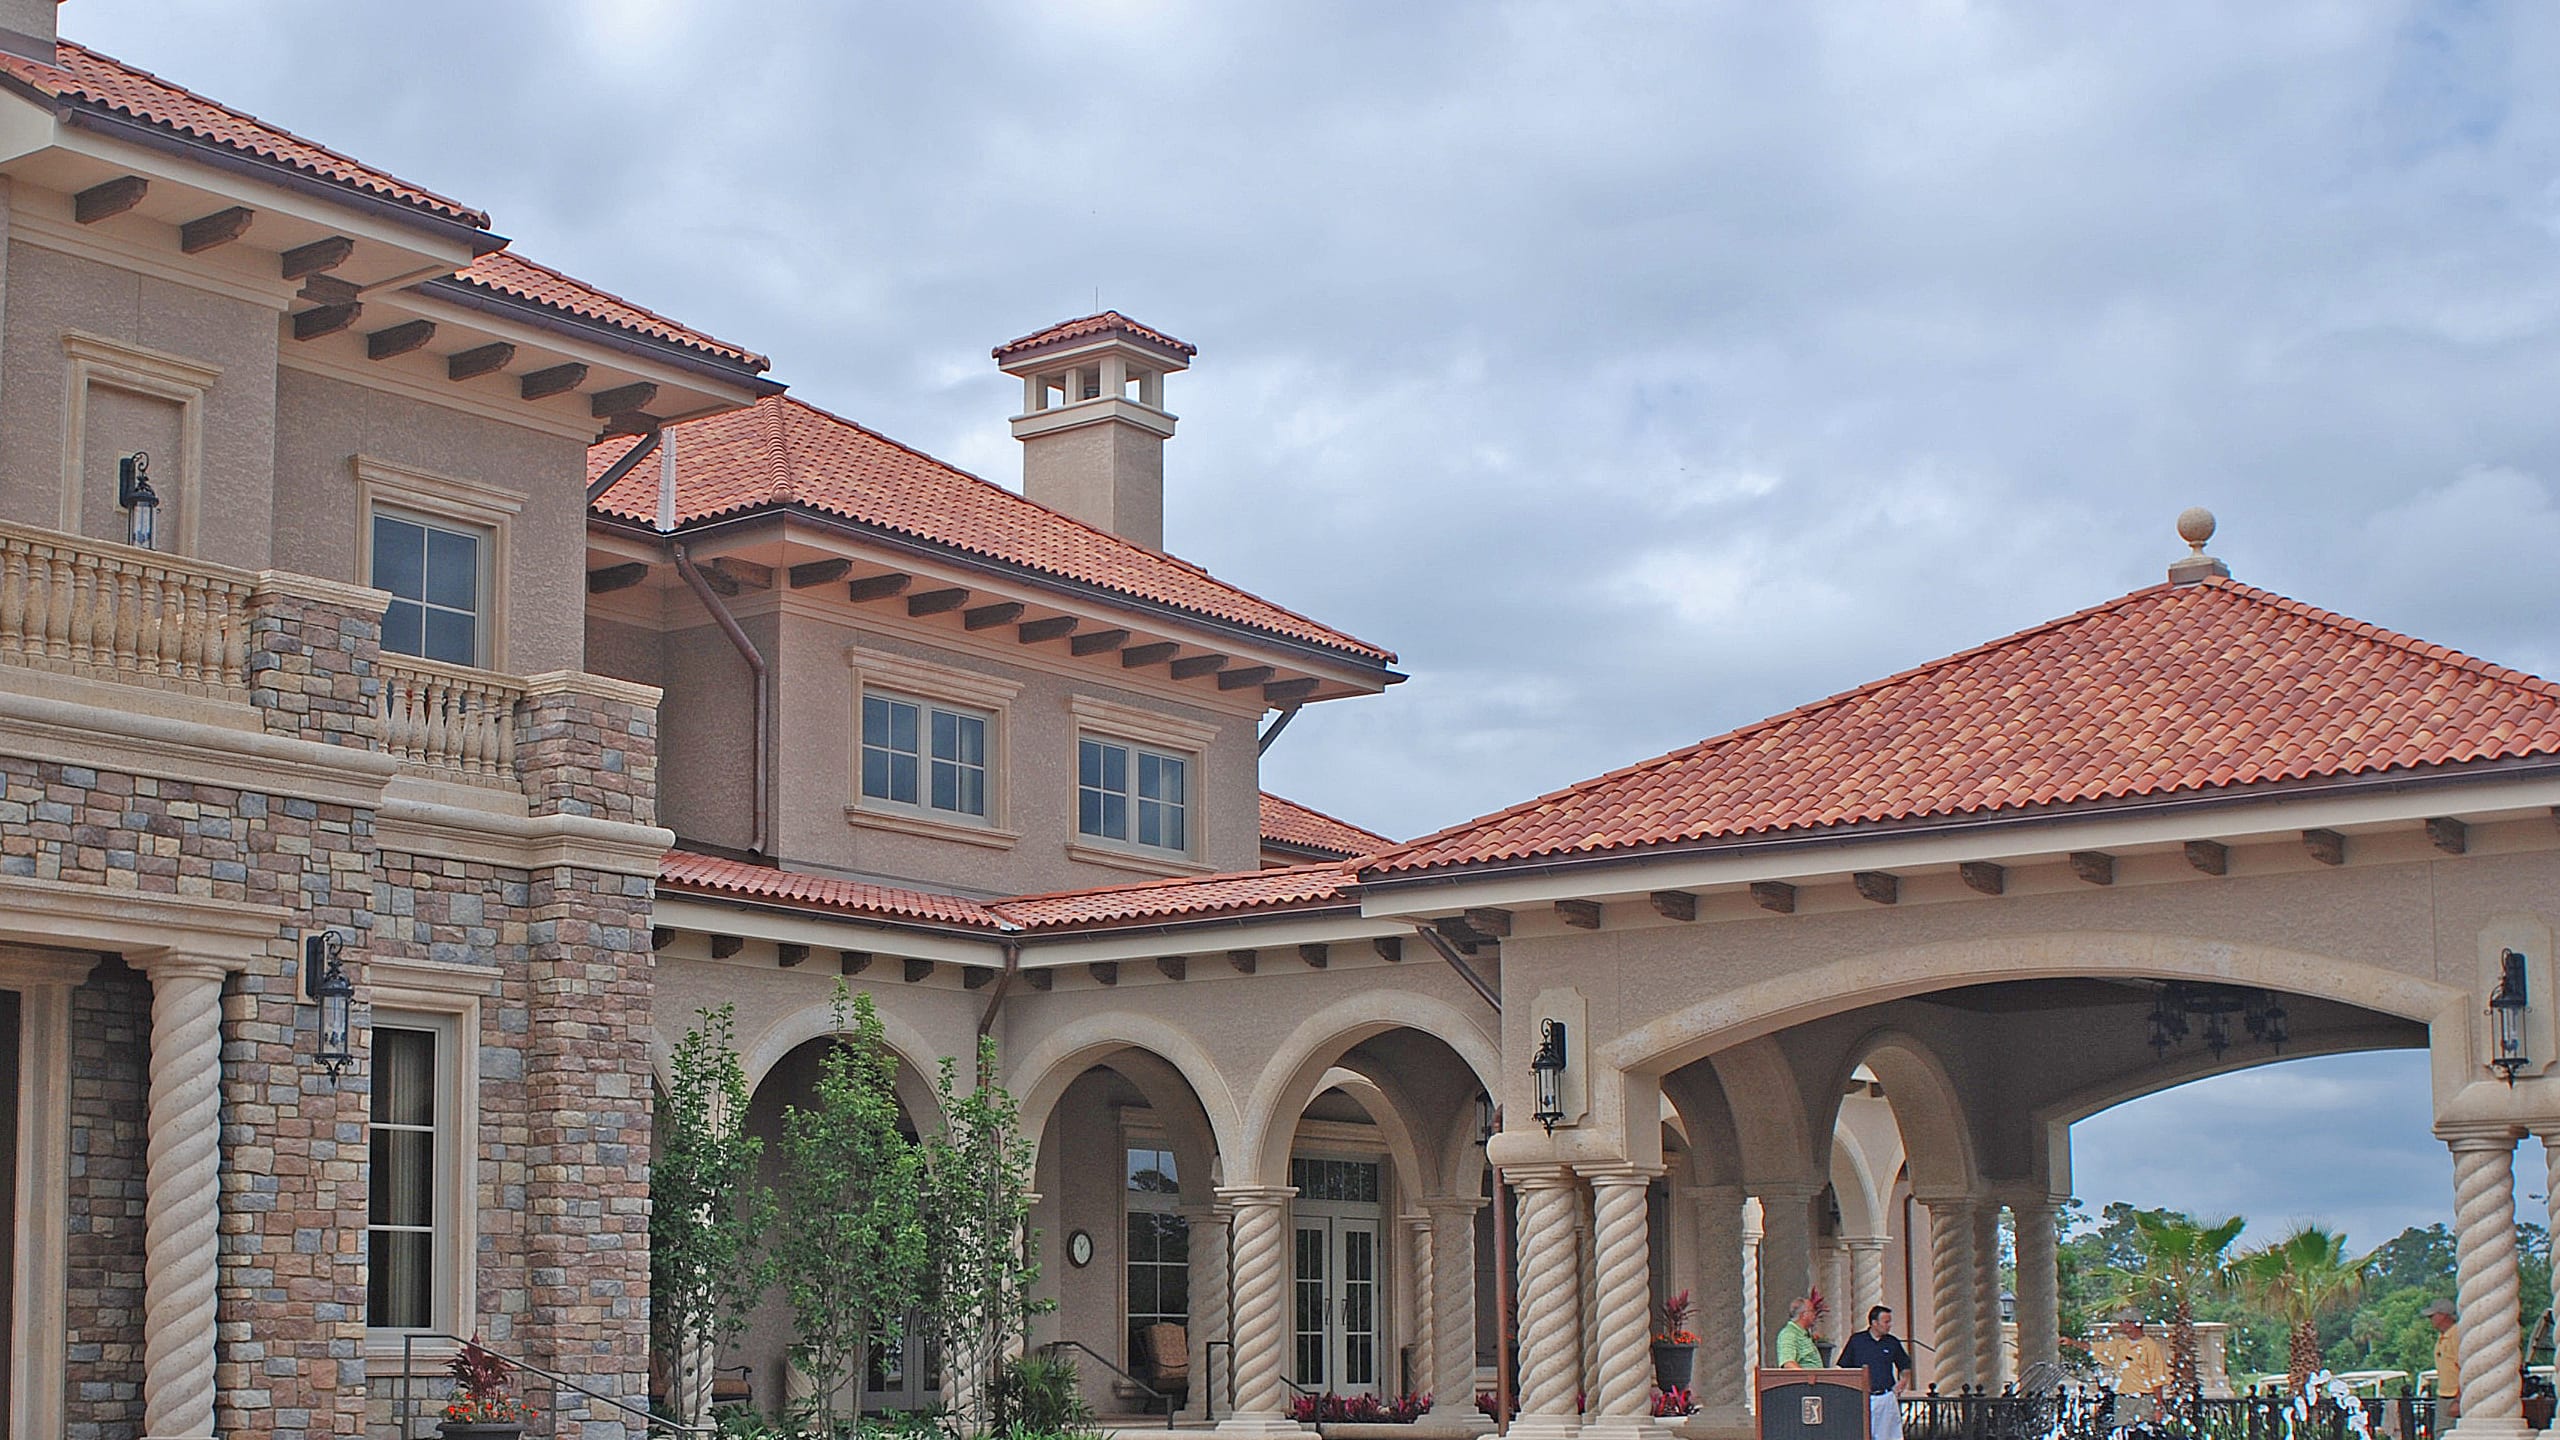 TPC Sawgrass Featuring Ludowici Spanish Clay Roof Tile